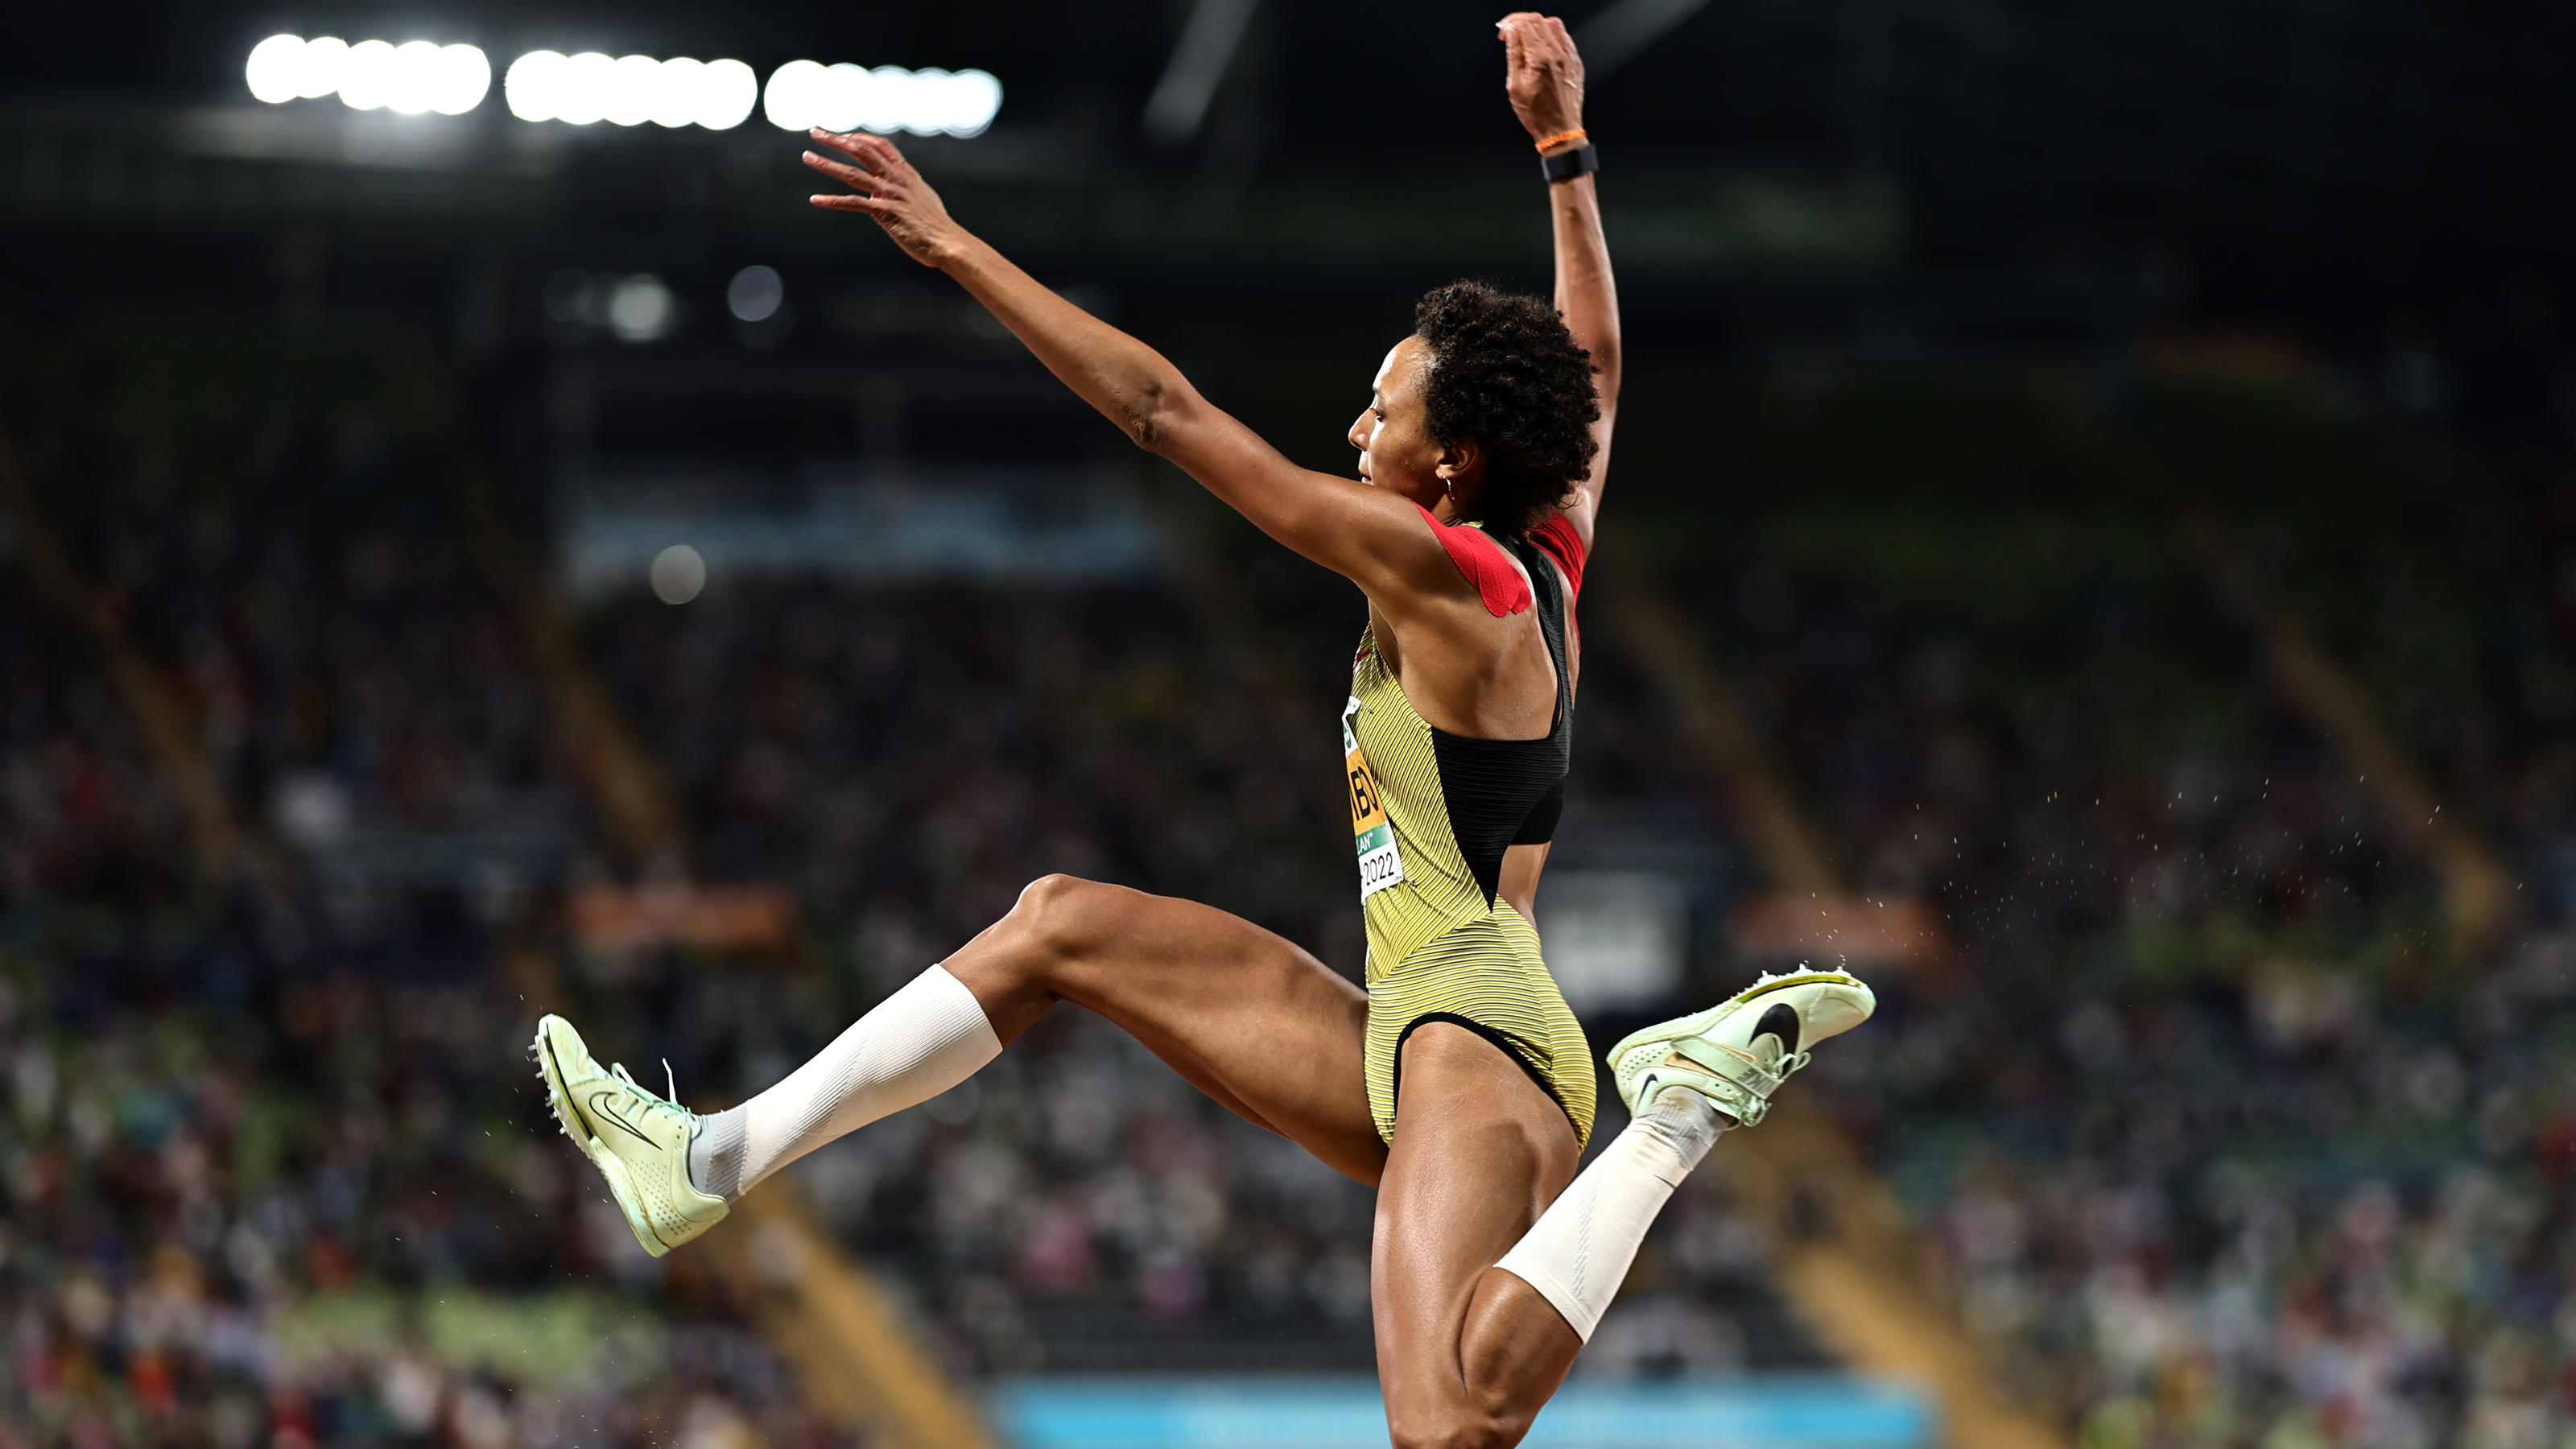 MUNICH, GERMANY - AUGUST 18: Malaika Mihambo of Germany competes in the Women's Long Jump Final during the Athletics competition on day 8 of the European Championships Munich 2022 at Olympiapark on August 18, 2022 in Munich, Germany. (Photo by Simon 